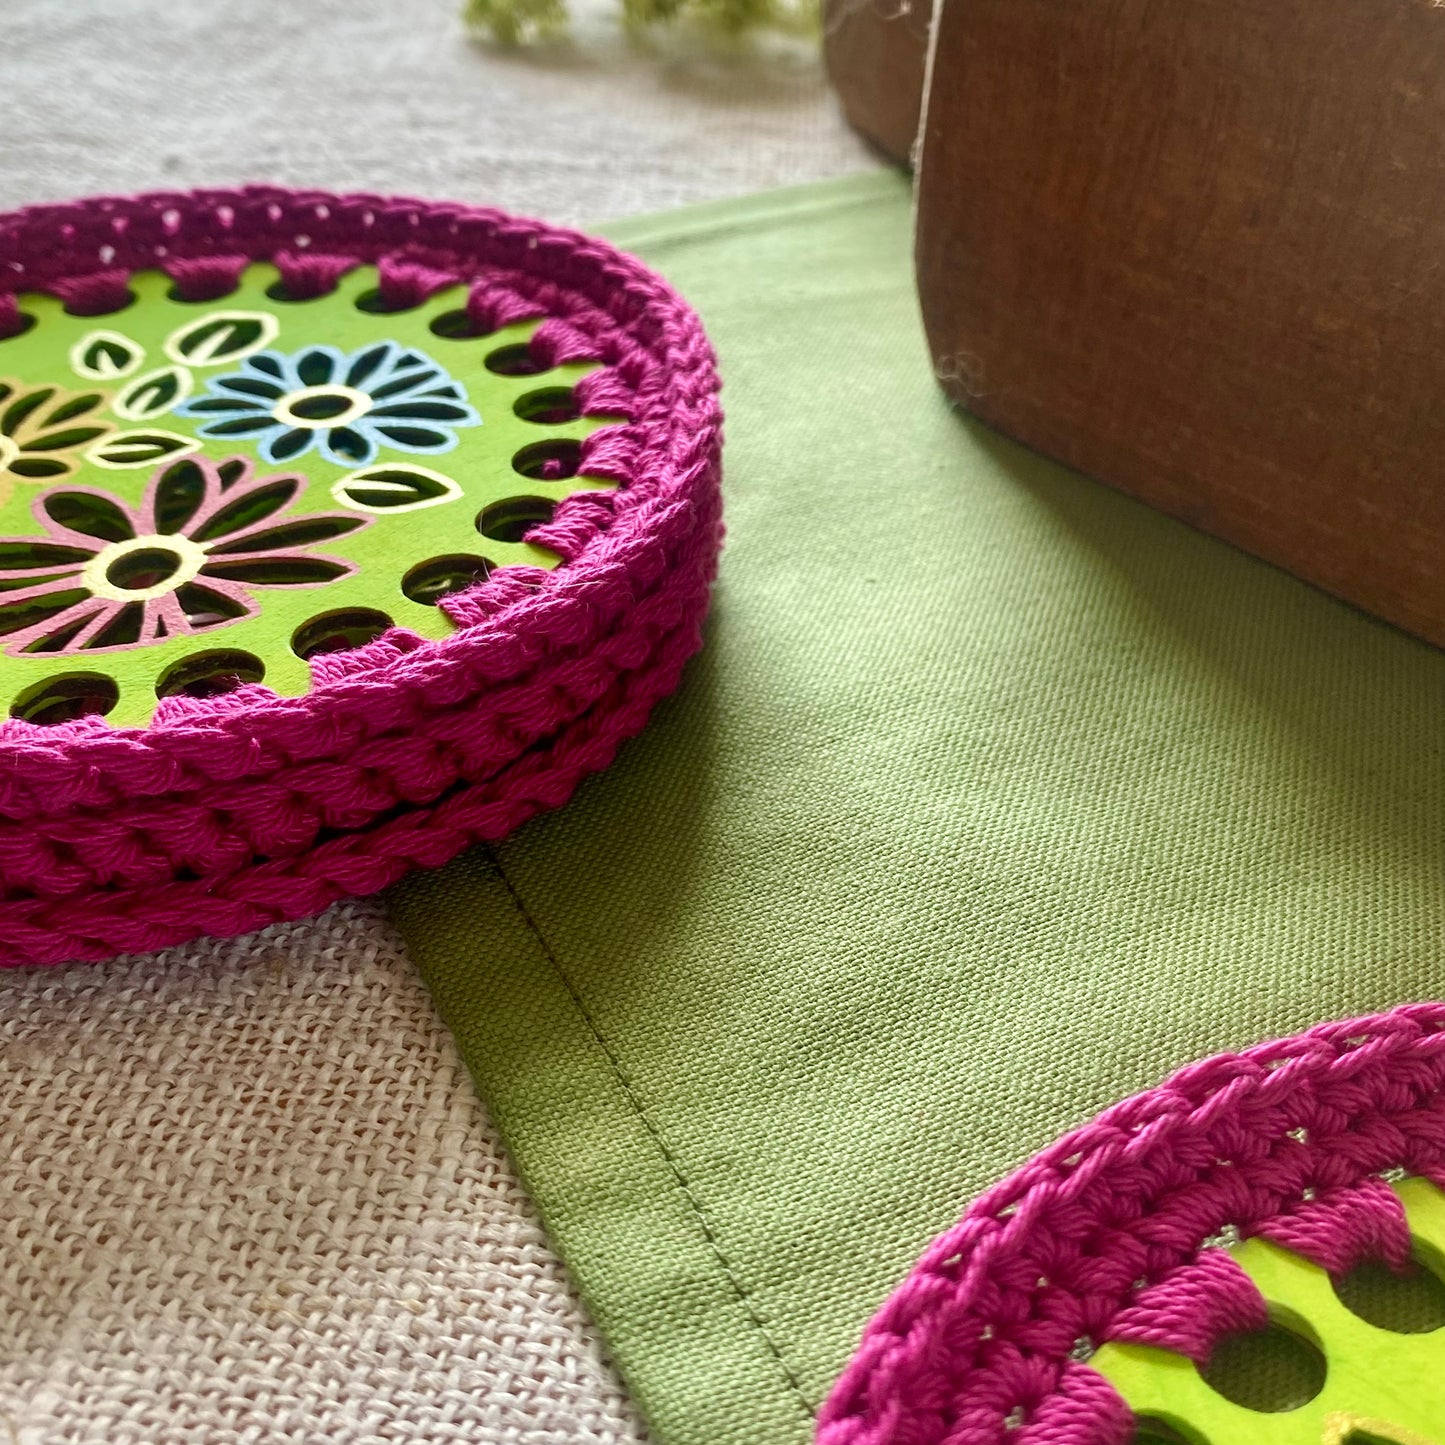 Handmade colorful coasters for your home